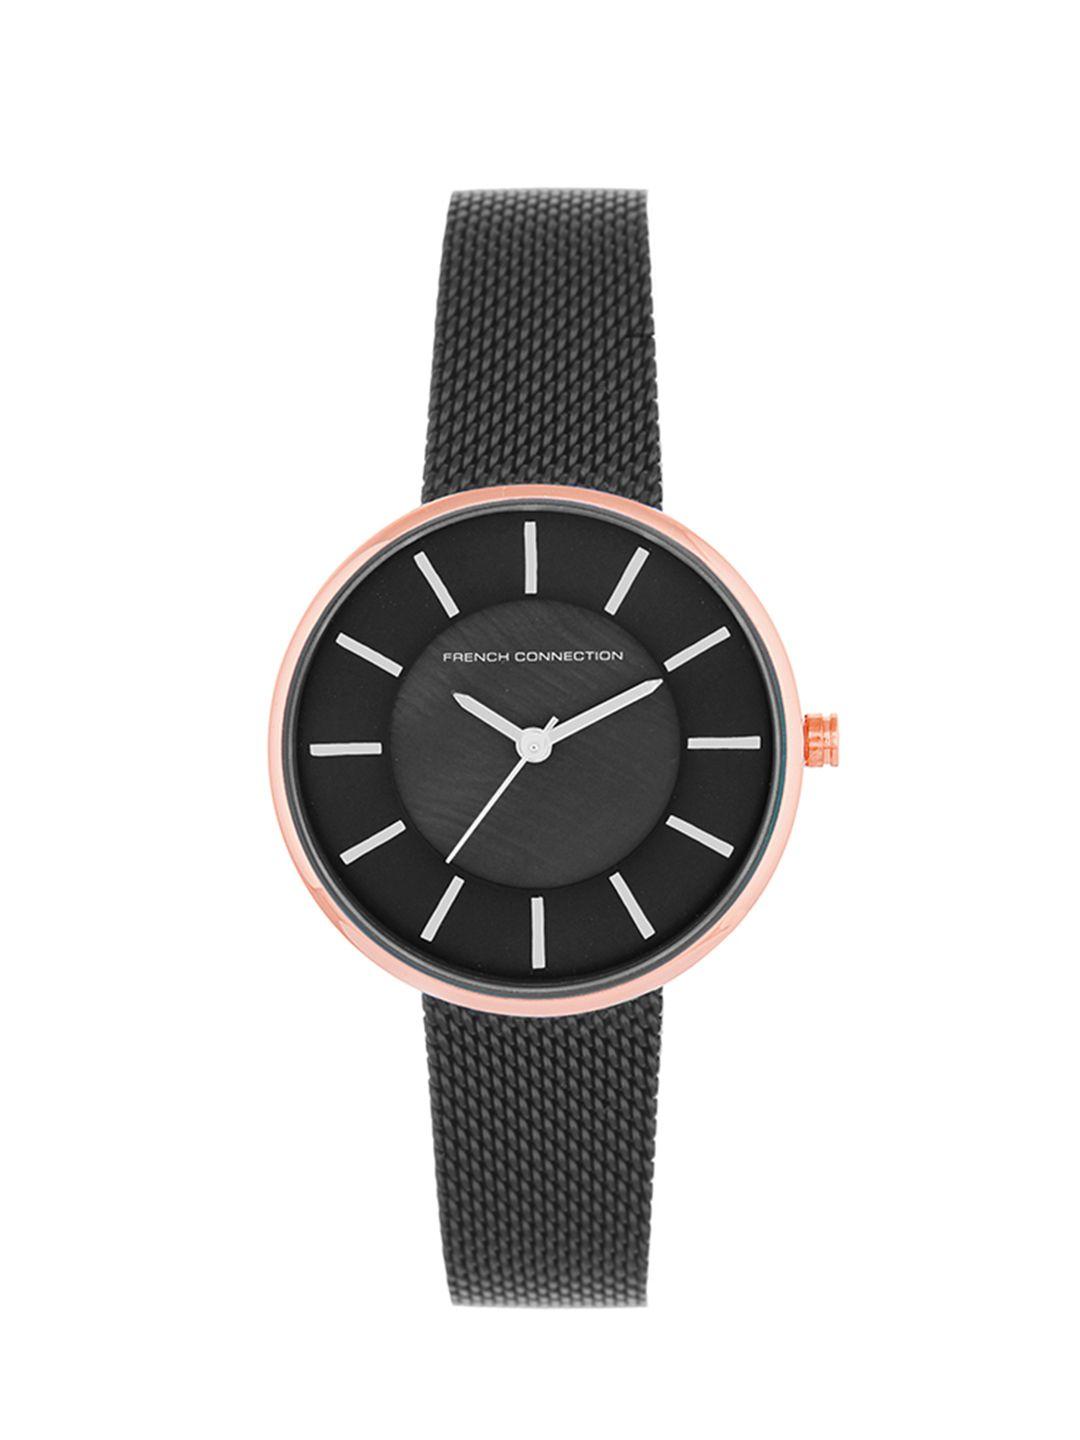 french-connection-women-black-dial-&-stainless-steel-analogue-watch---fcn0005f